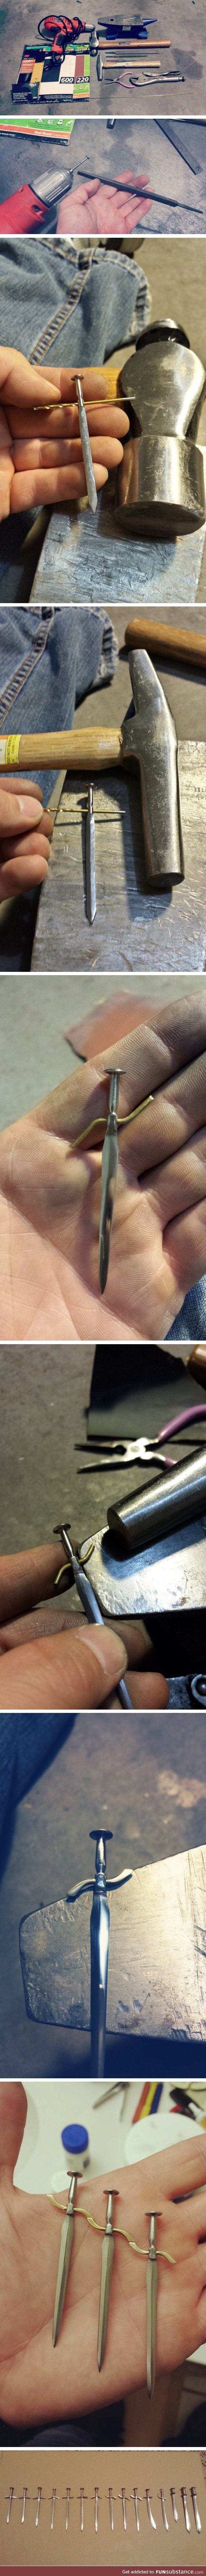 Tiny swords forged from nails